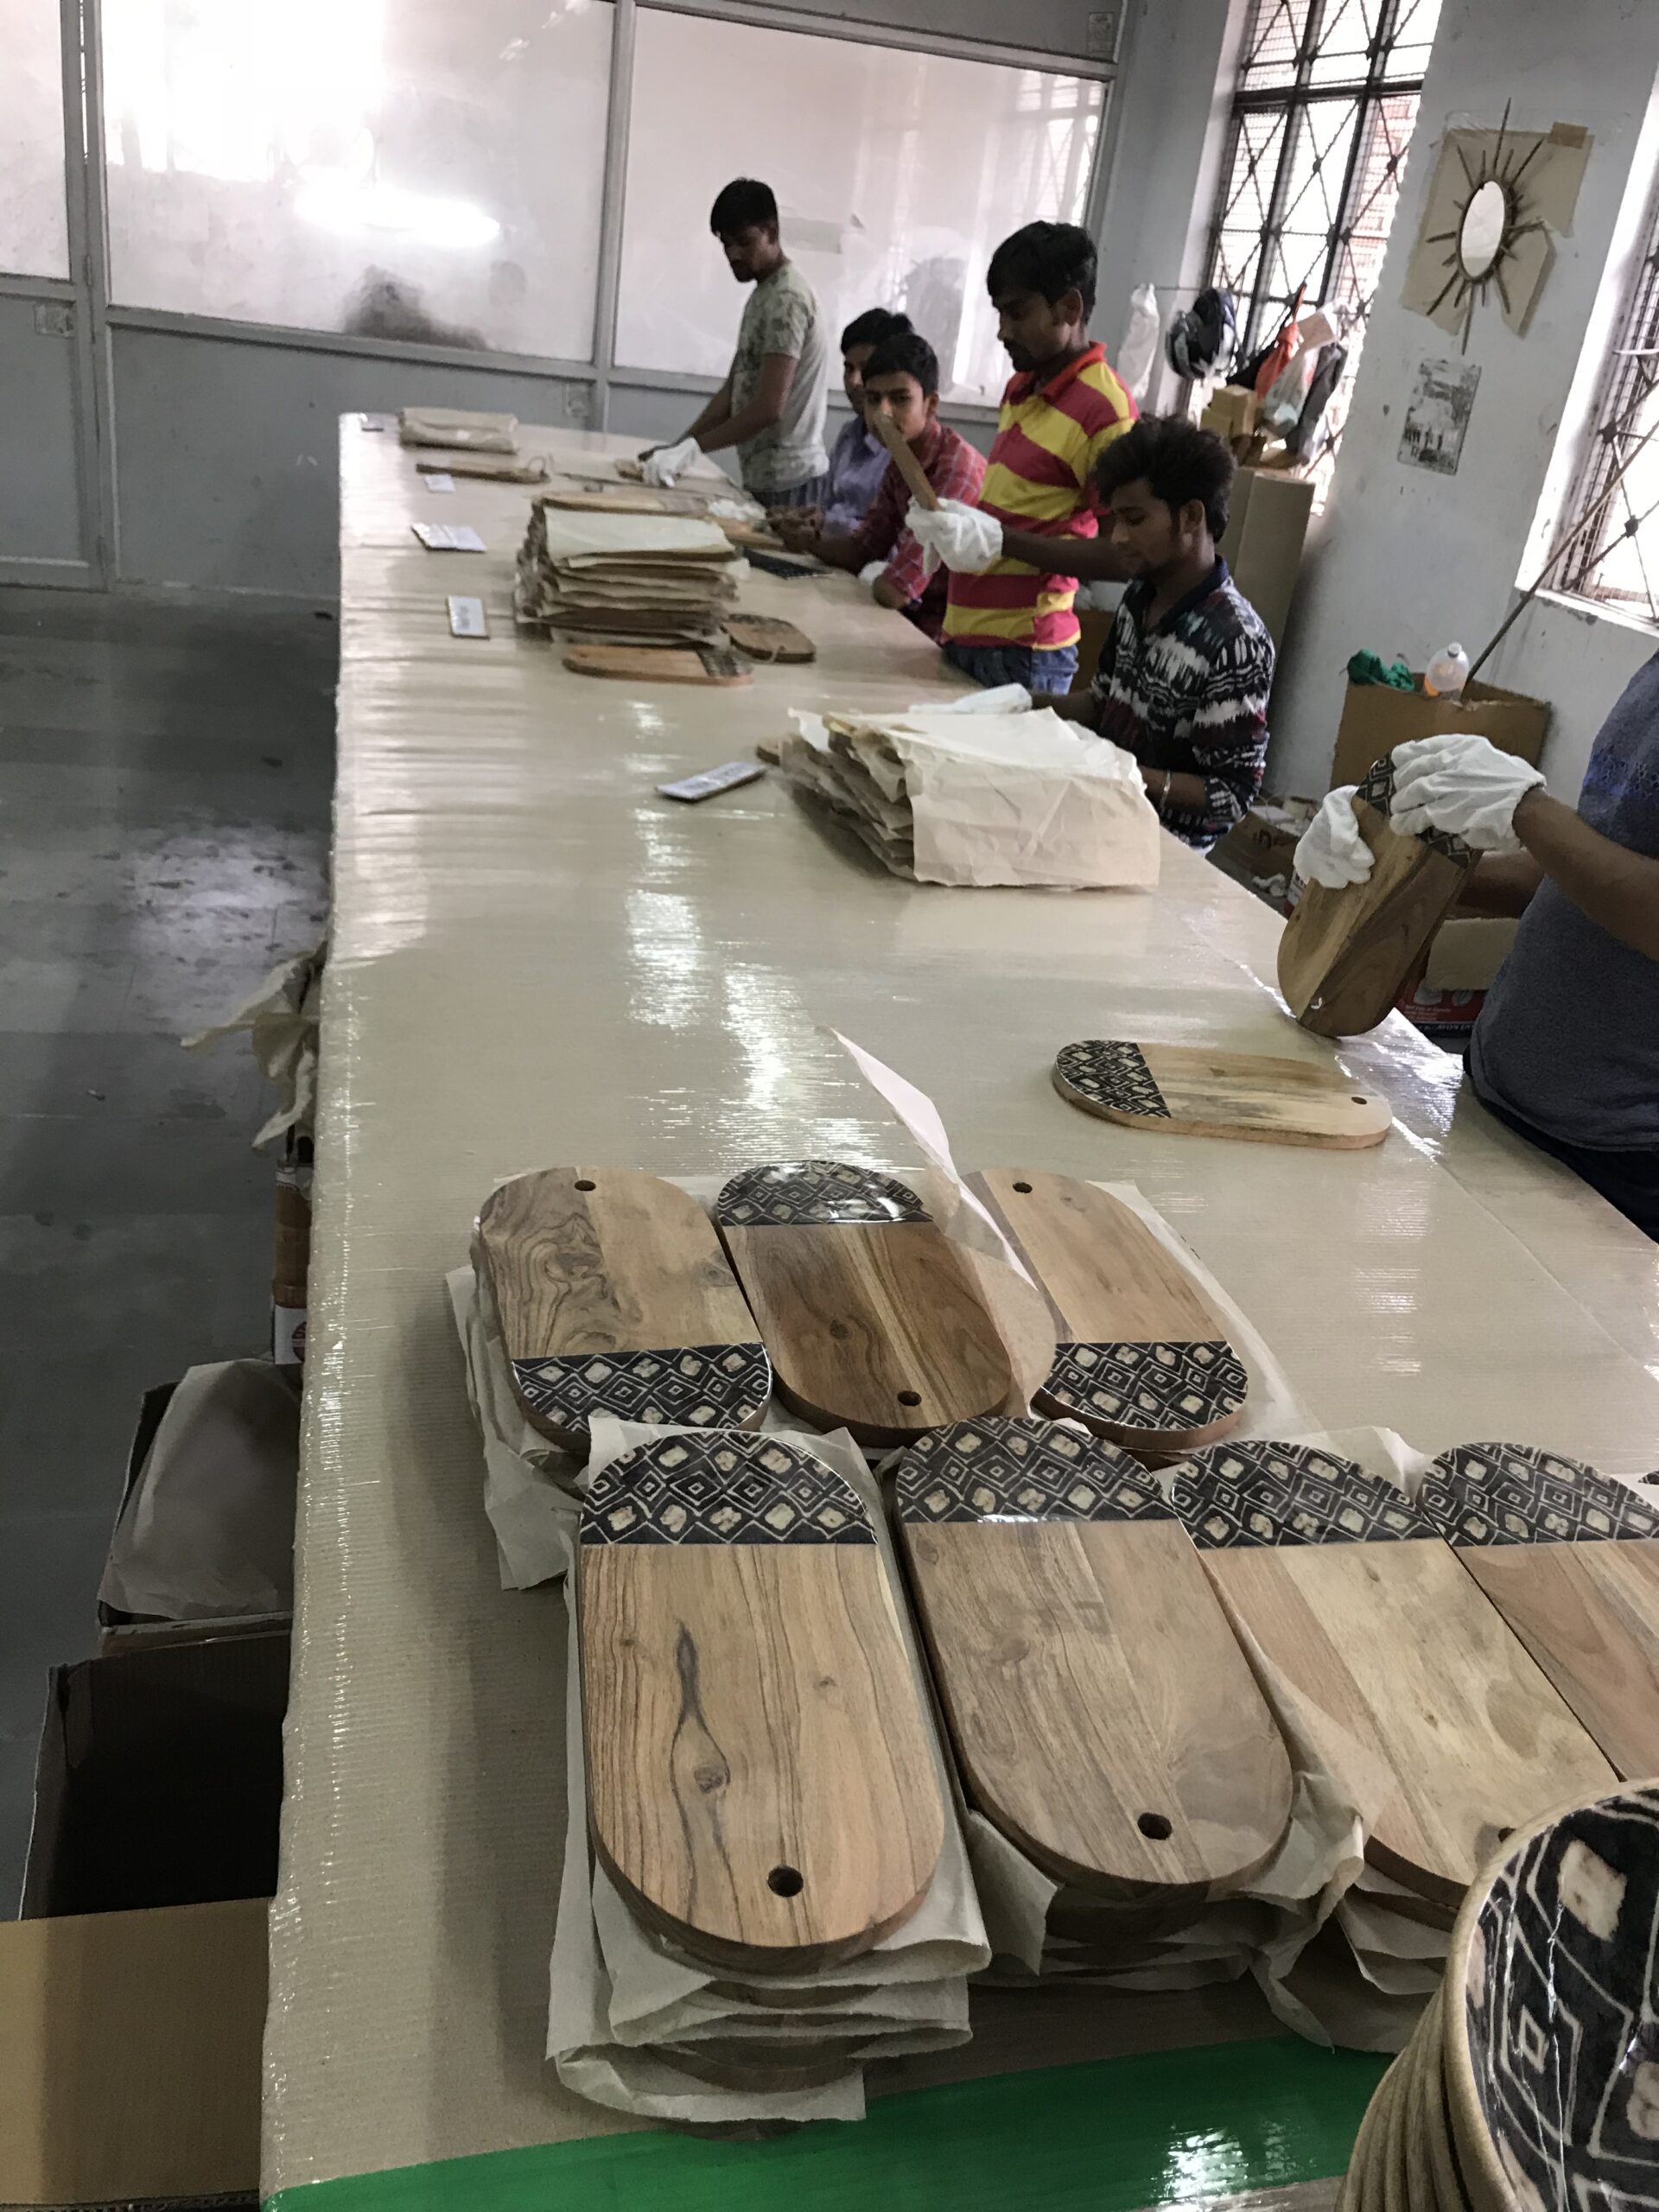 Quality Control inspections taking place in India on a wood and enamel serving board